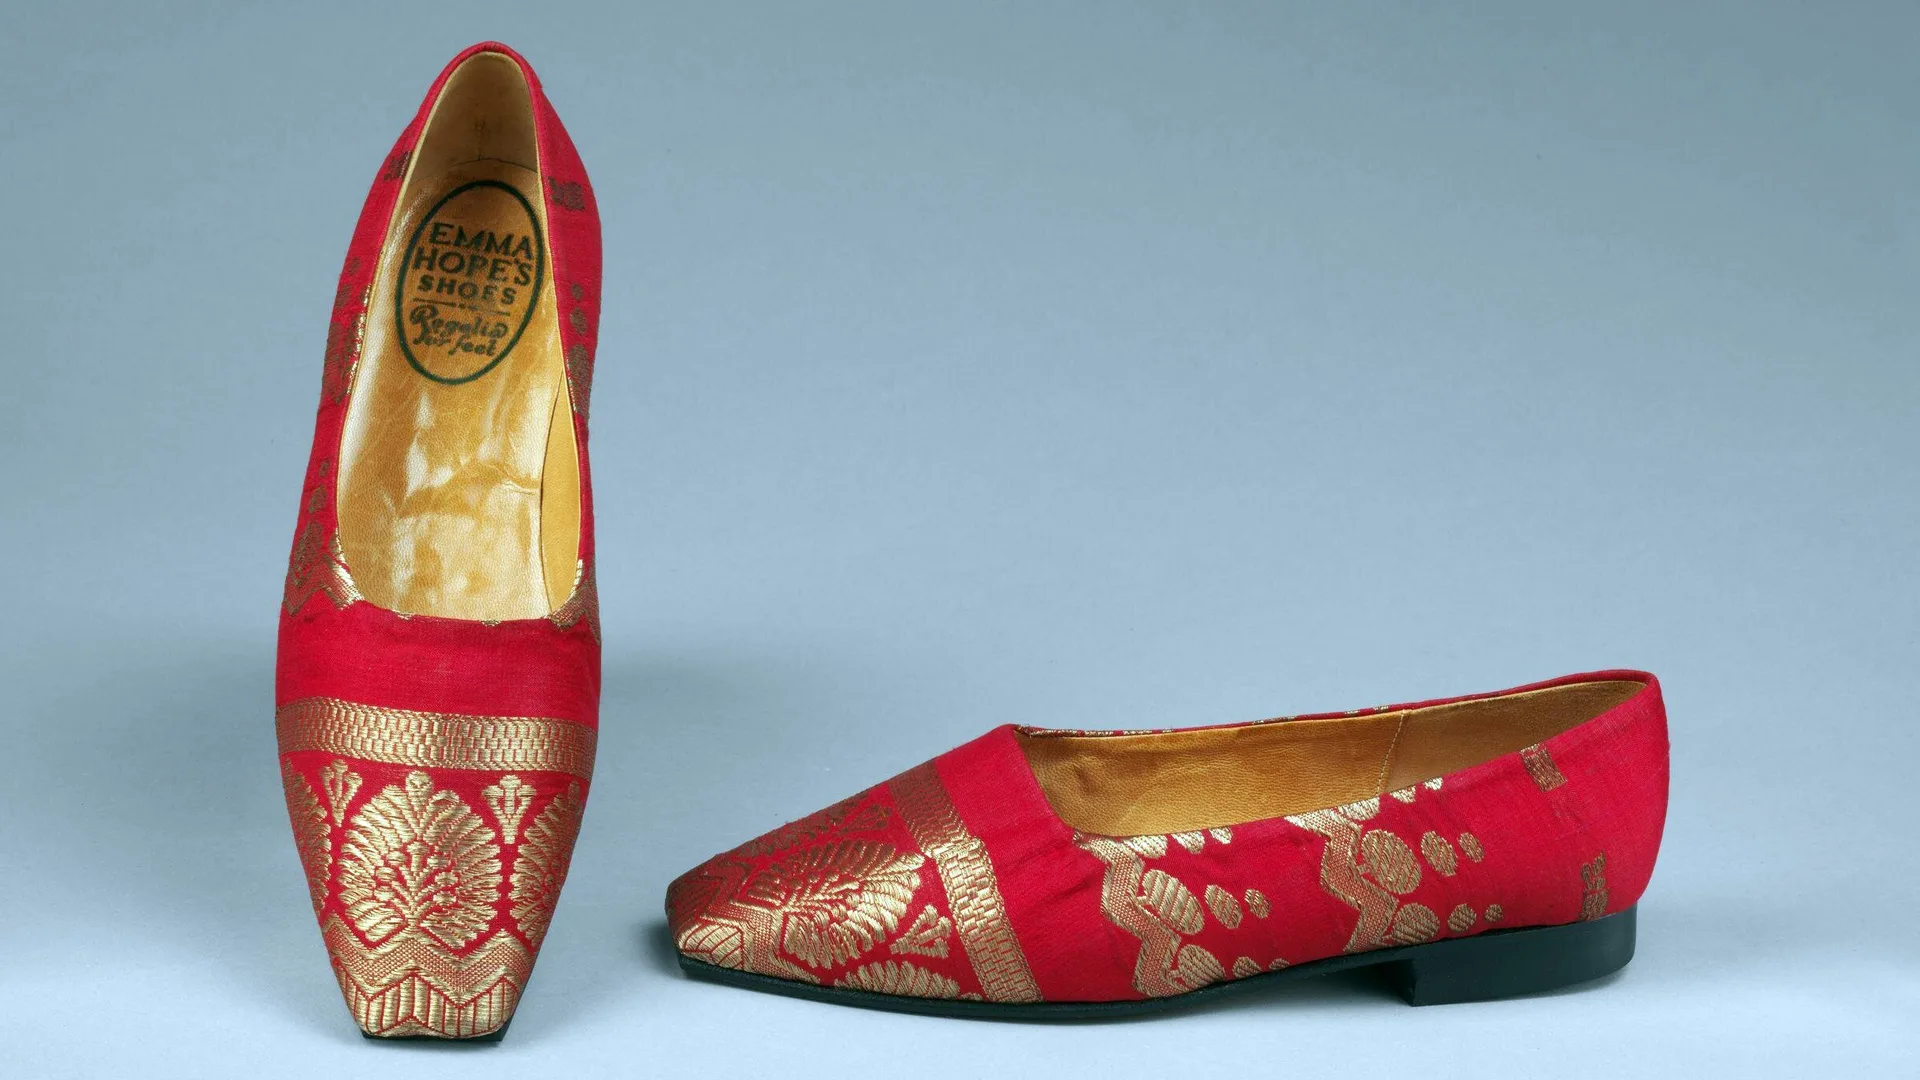 A photograph of some red and gold sari shoes made in 1989 against a grey background